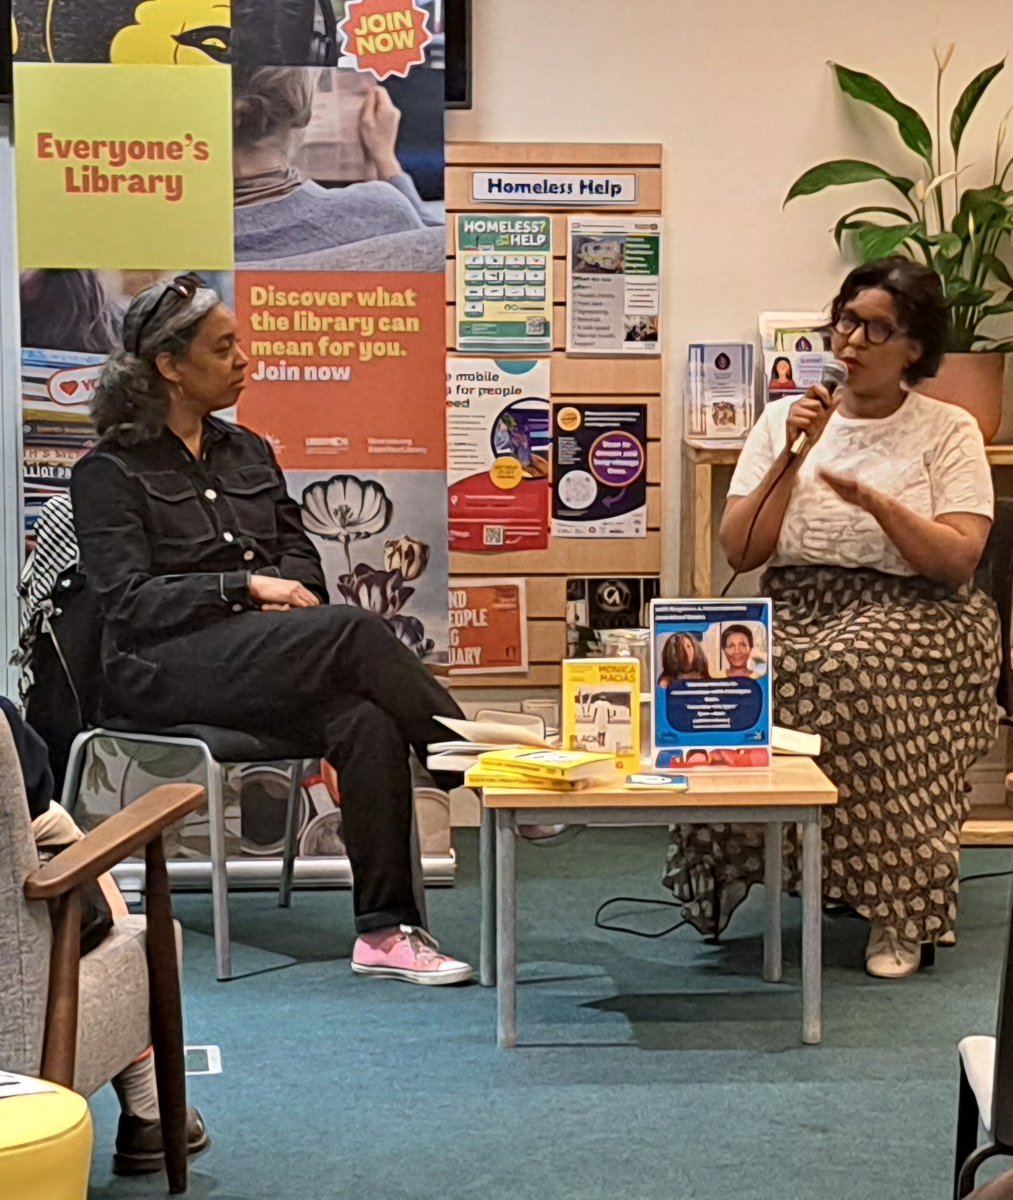 Black Girl From Pyongyang in Brighton During the weekend our lovely author Monica Macias went down to Brighton for some events and a bookshop tour Thank you to everyone for having Monica👏 ✍️You can find signed copies here: @AfroriBooks @Feminist_Books_ @BrightonWstones